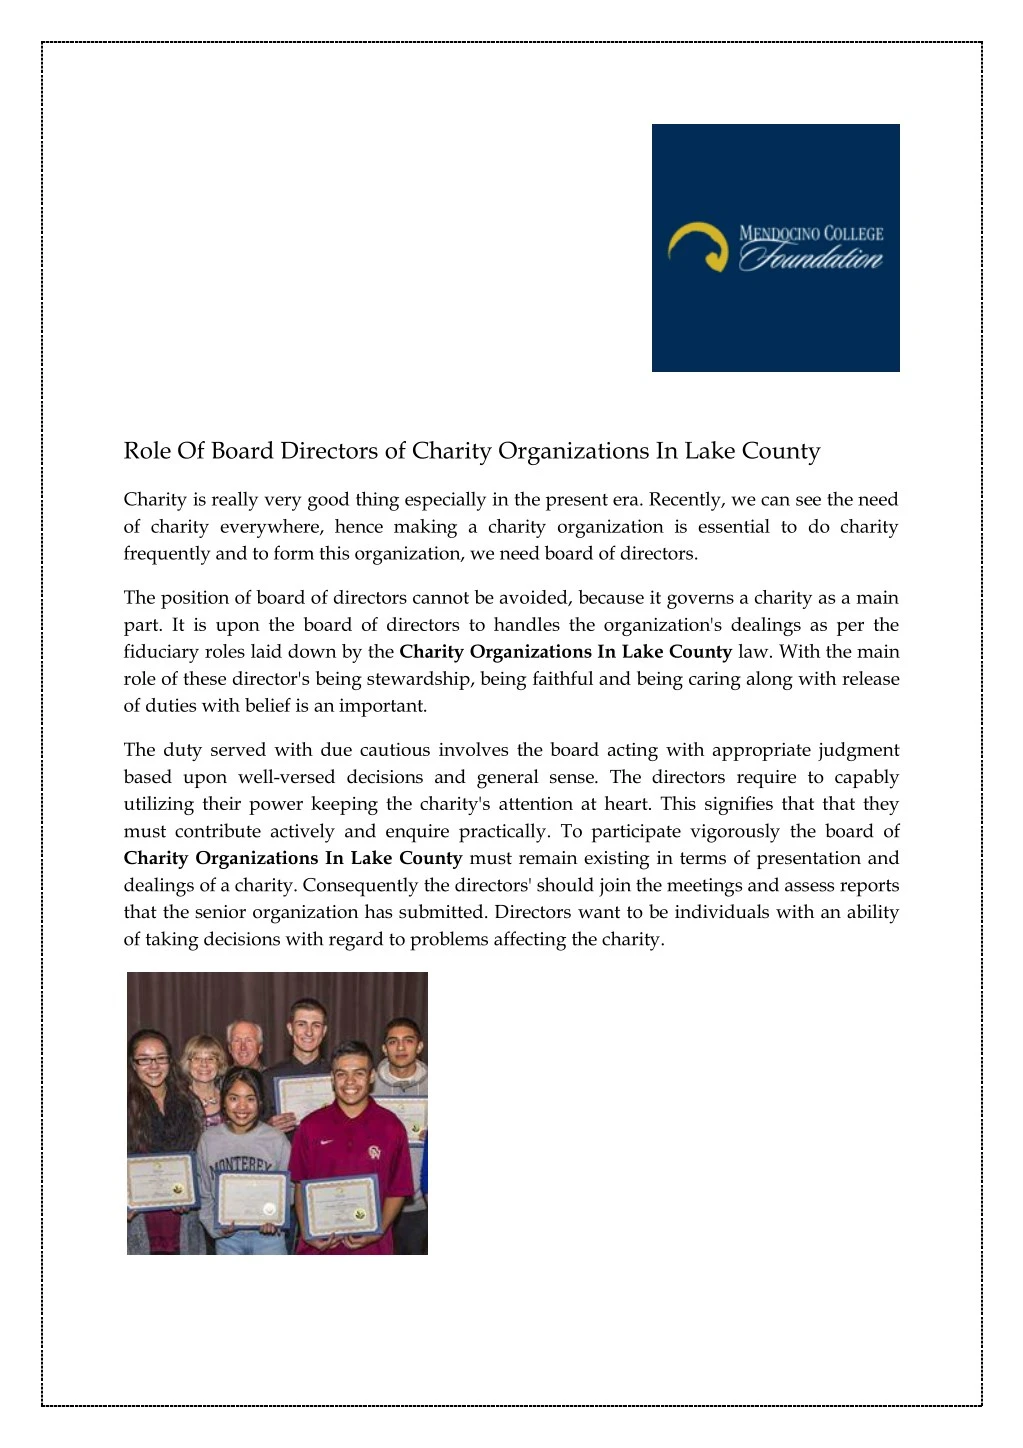 role of board directors of charity organizations